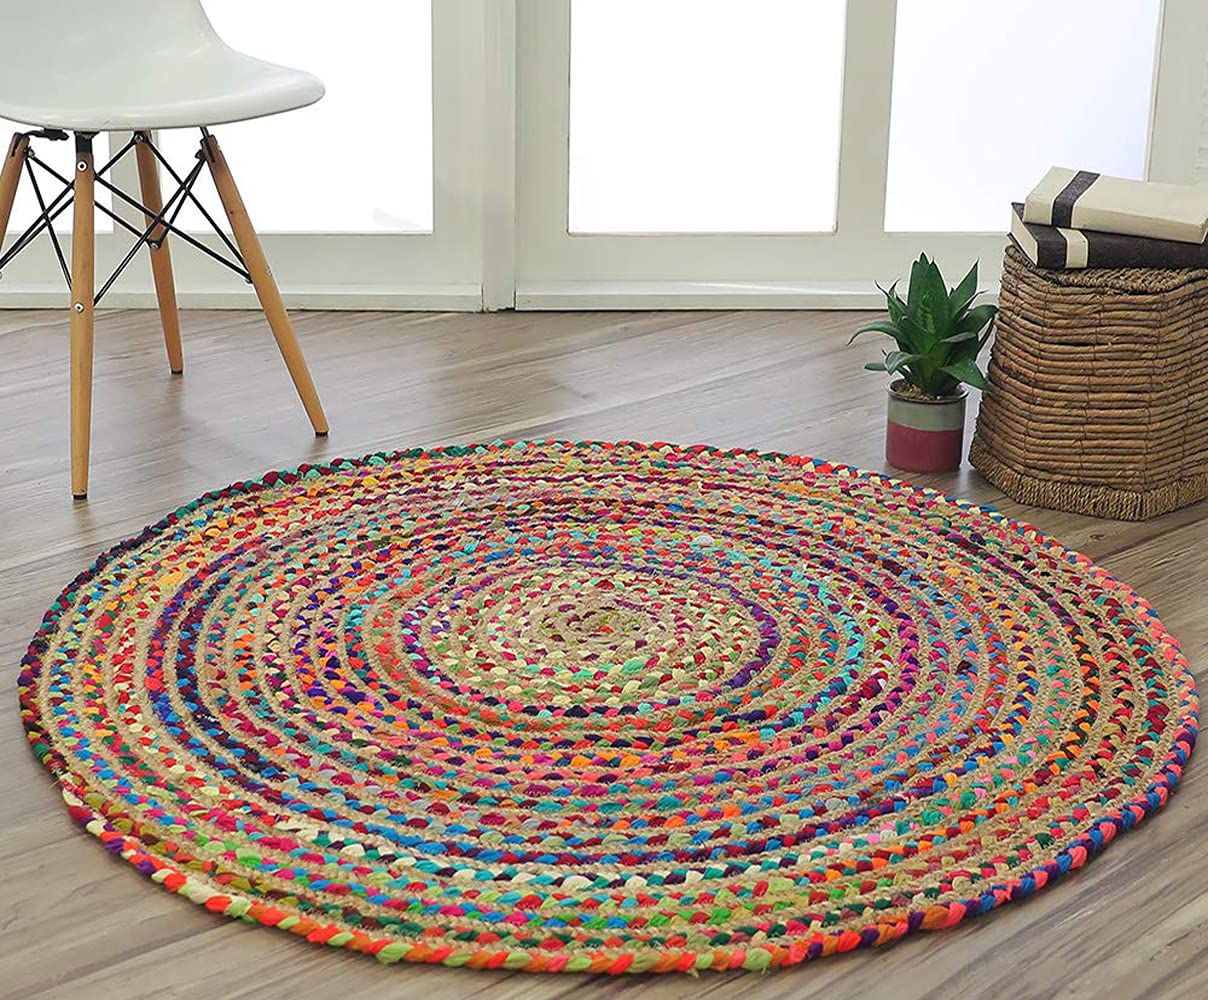 Roll over image to zoom in        Habere India-All the Cultures Fabricating India Hand Woven Handmade Jute Round Braided Centre Table Carpet (Multicolor, 4 x 4 ft) - Homely Arts